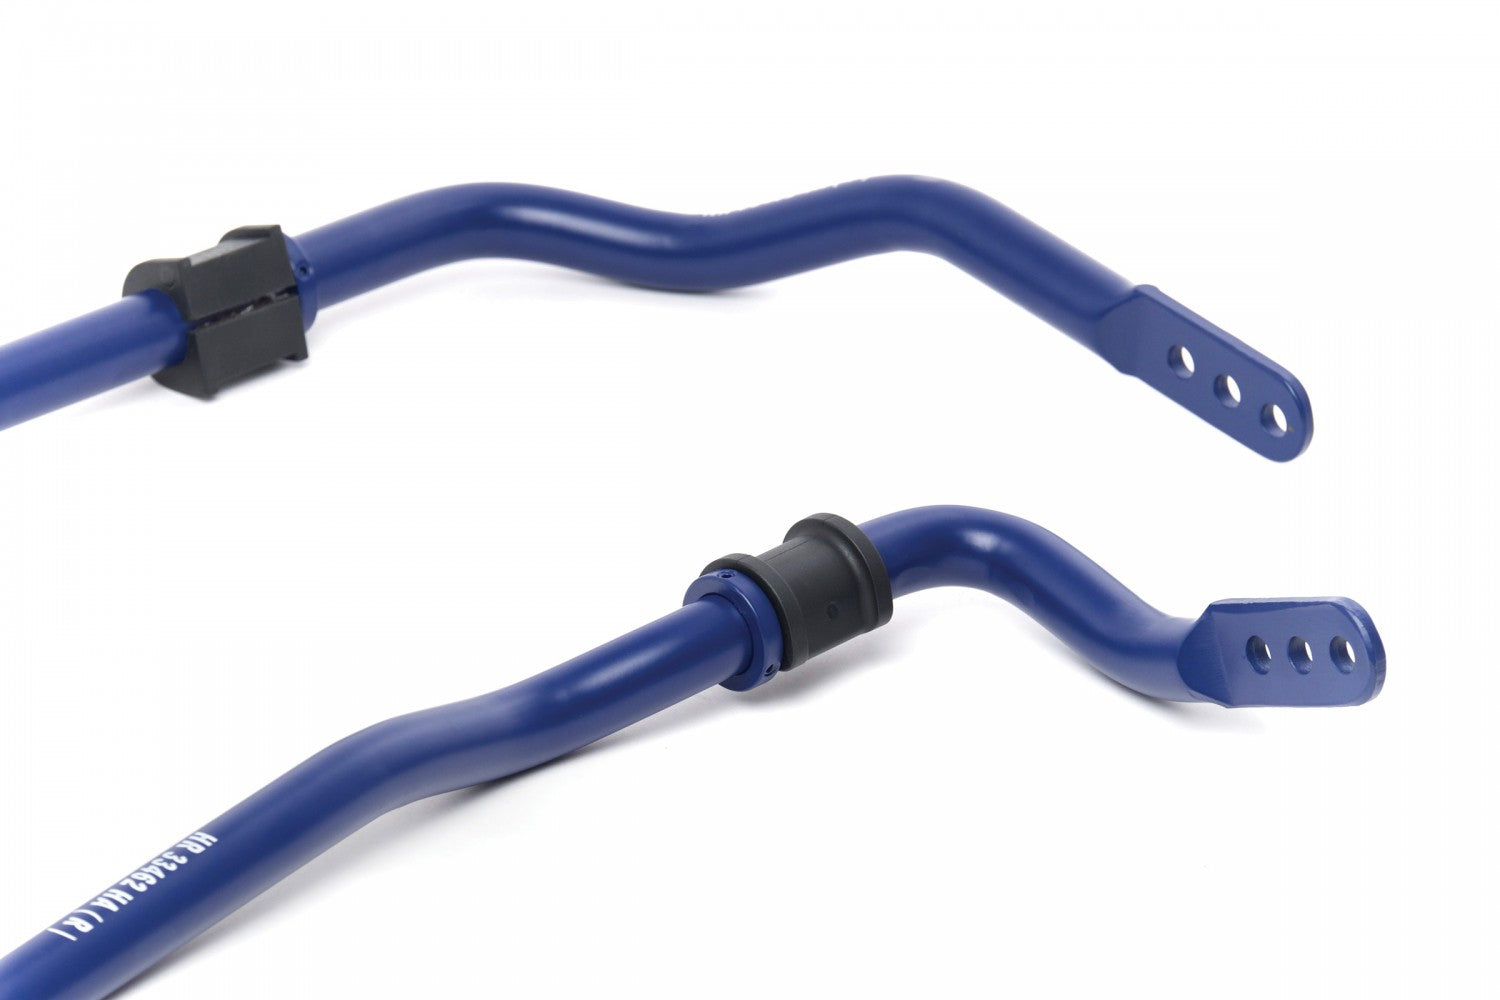 H&R SWAY BARS | Performance Racing Parts from Paragon Competition